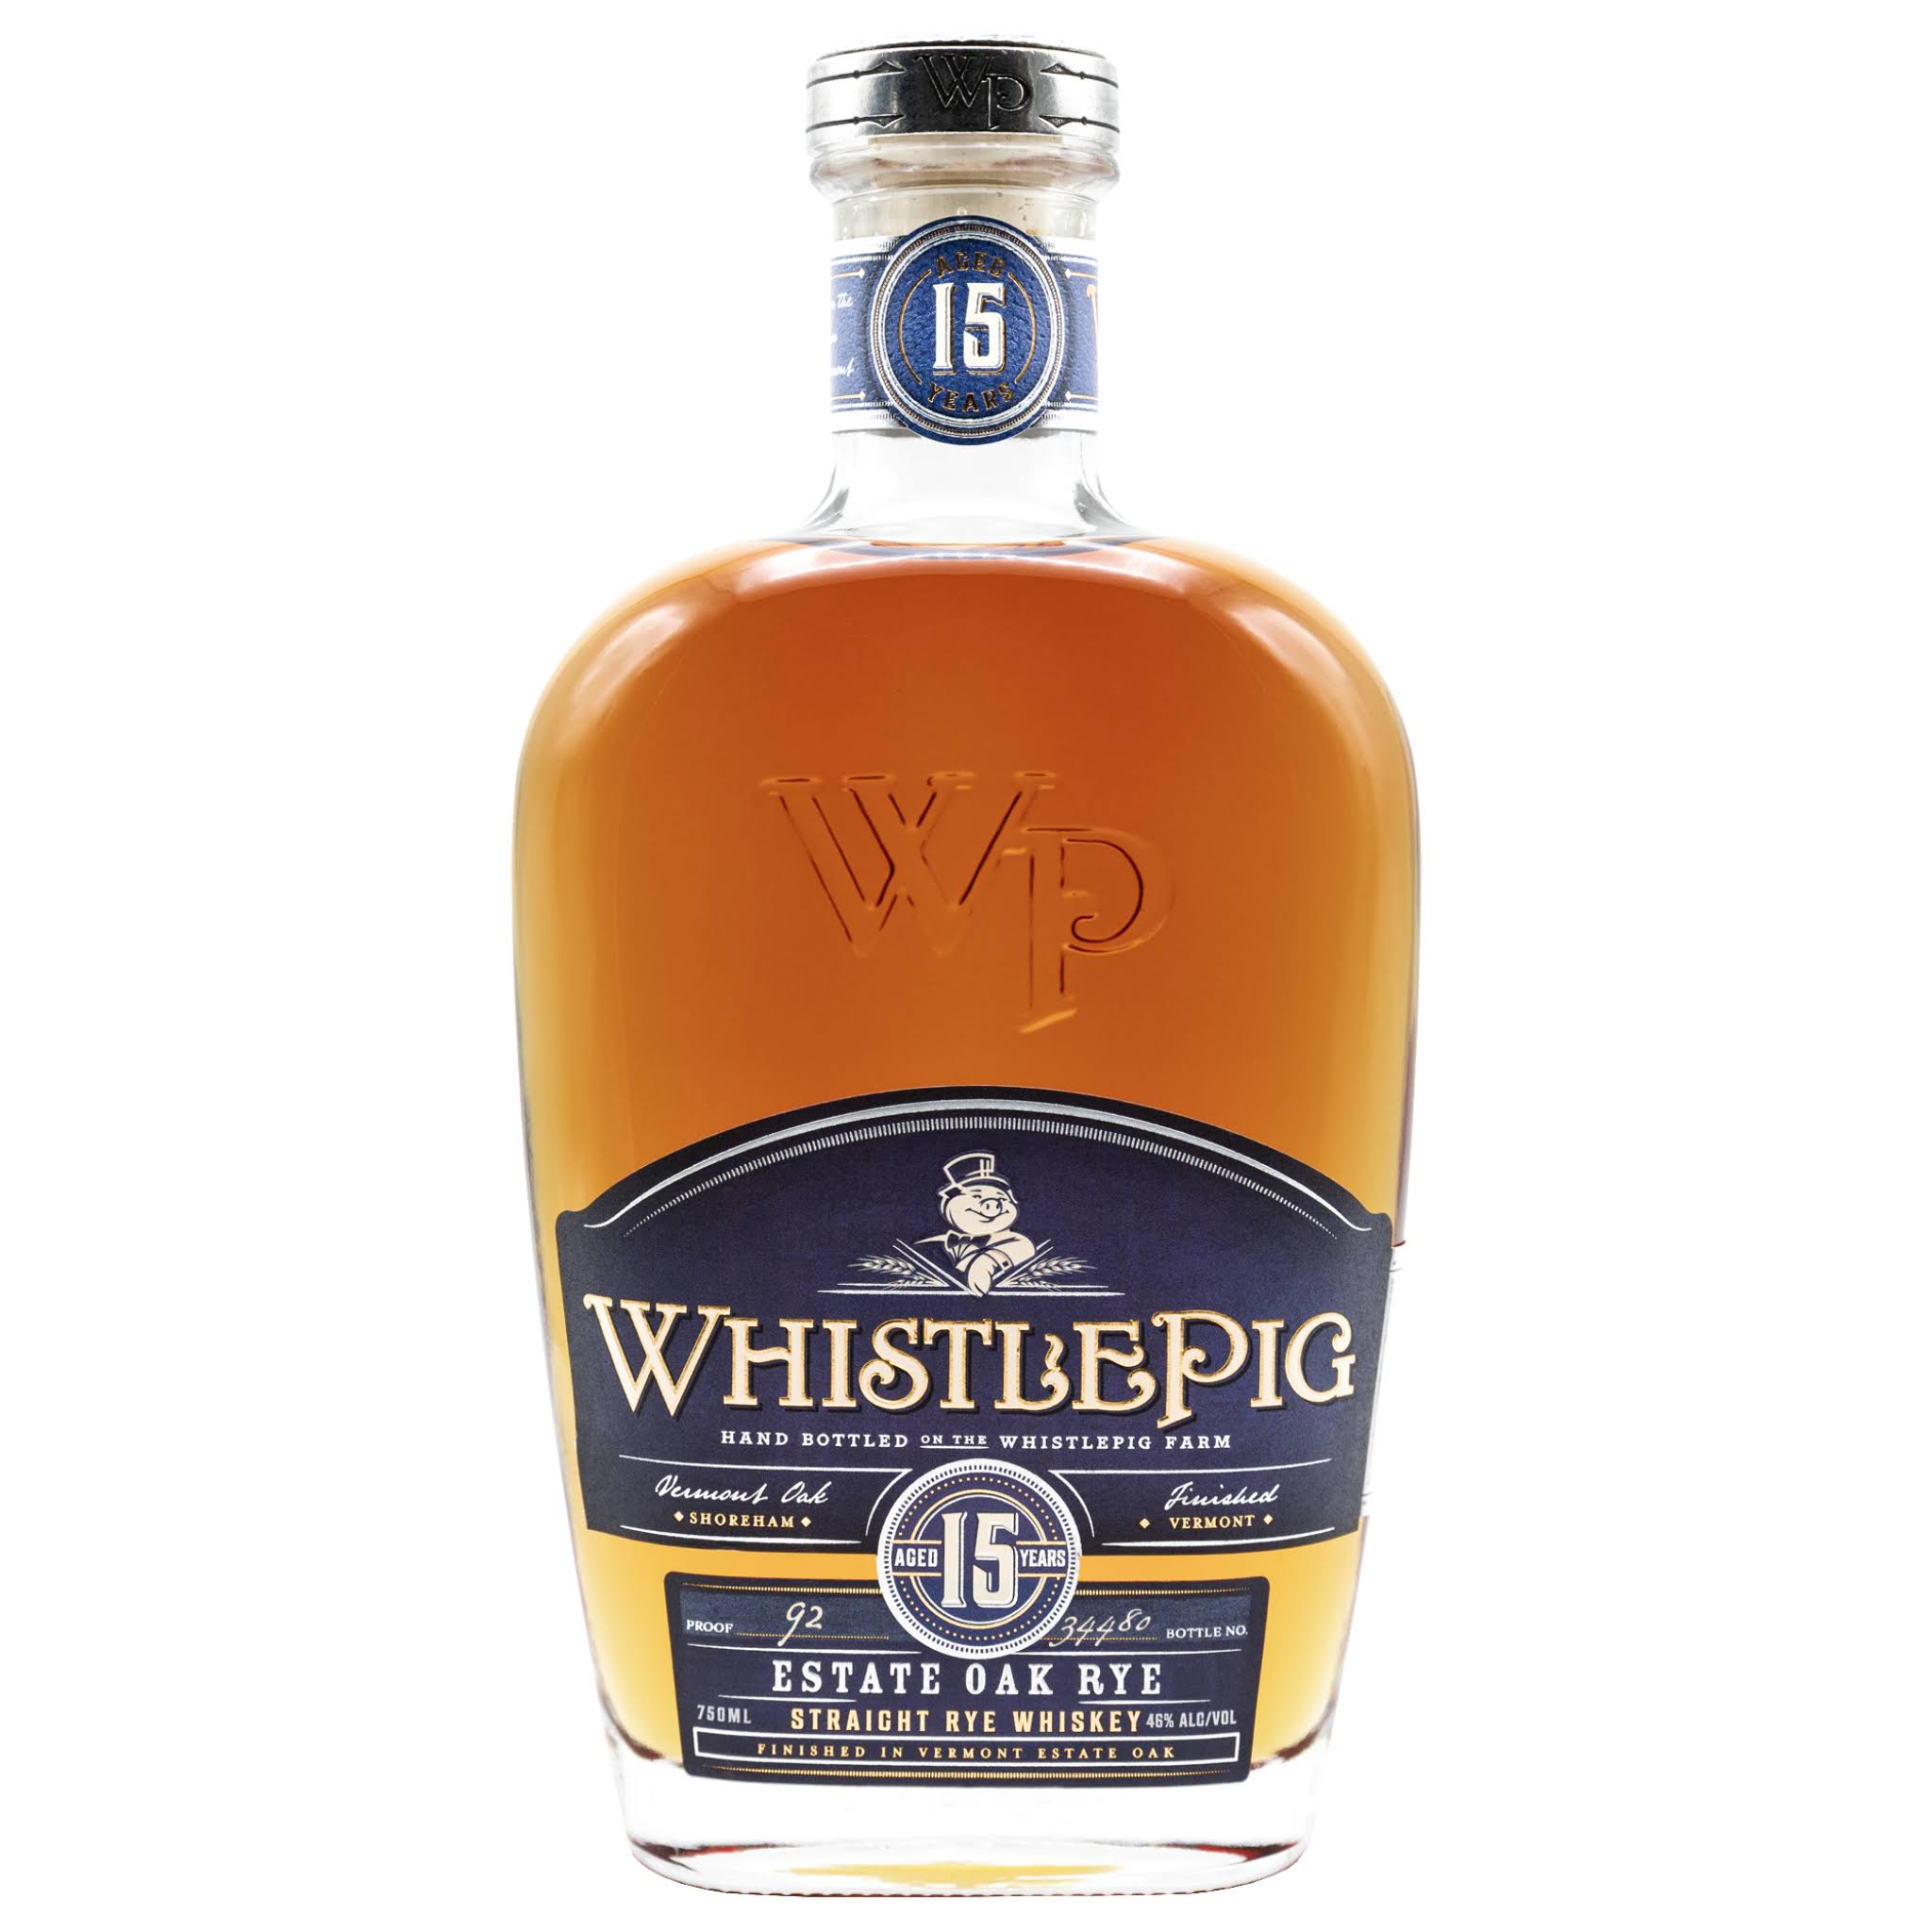 Whistlepig 15 Year Old Straight Rye Whiskey 750ml